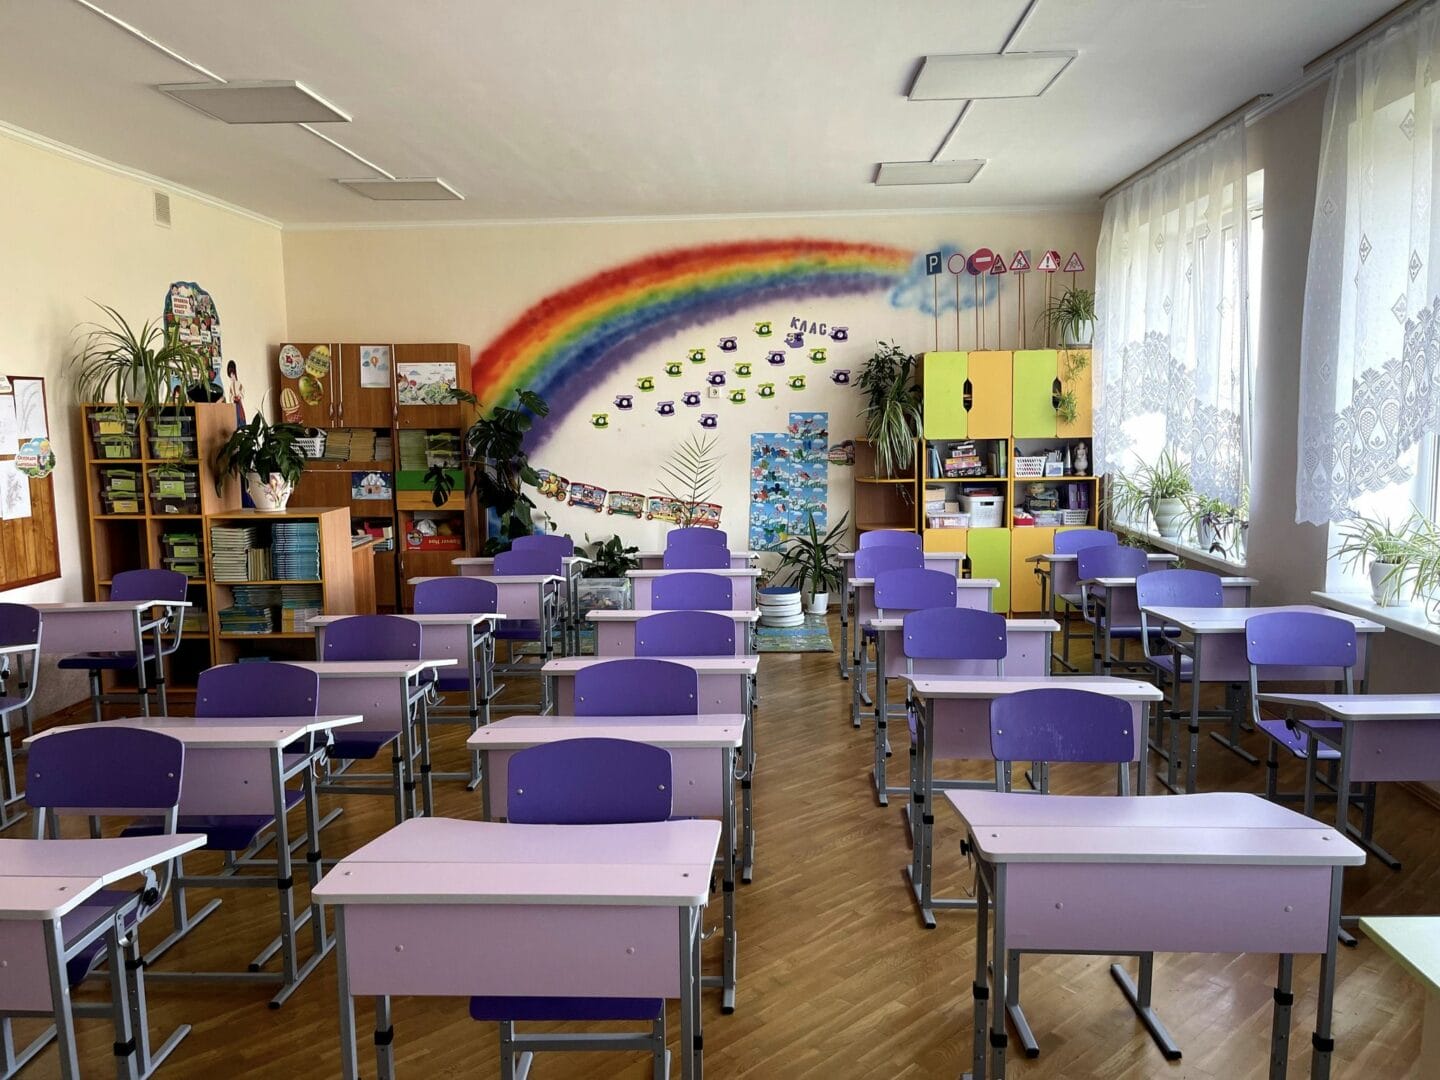 A schoolroom at the Yampil Lyceum